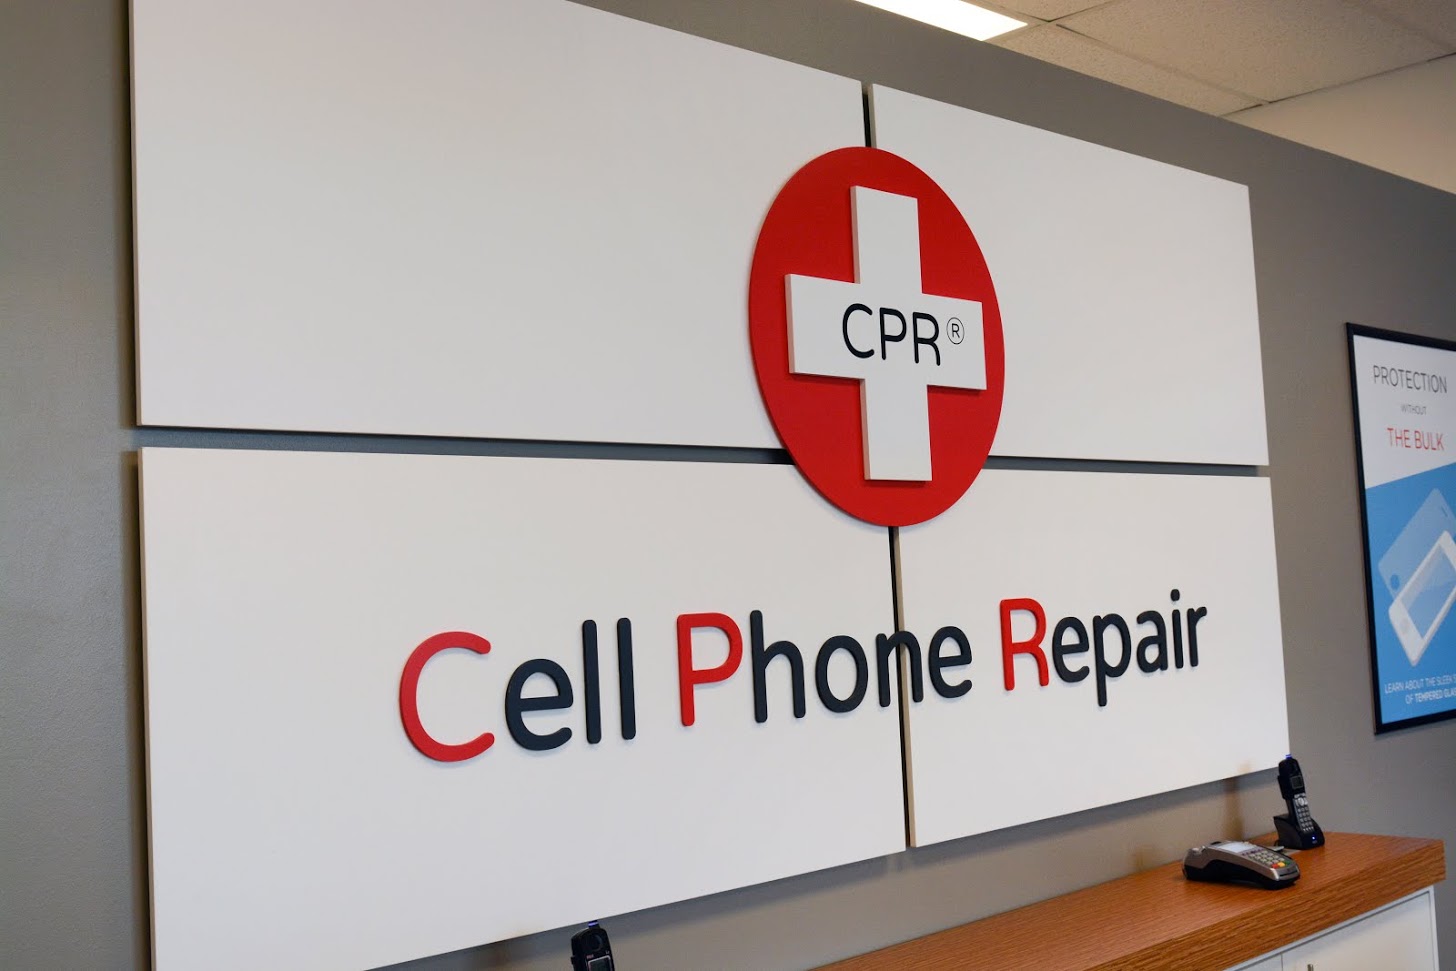 CPR Cell Phone Repair, Thursday, January 17, 2019, Press release picture